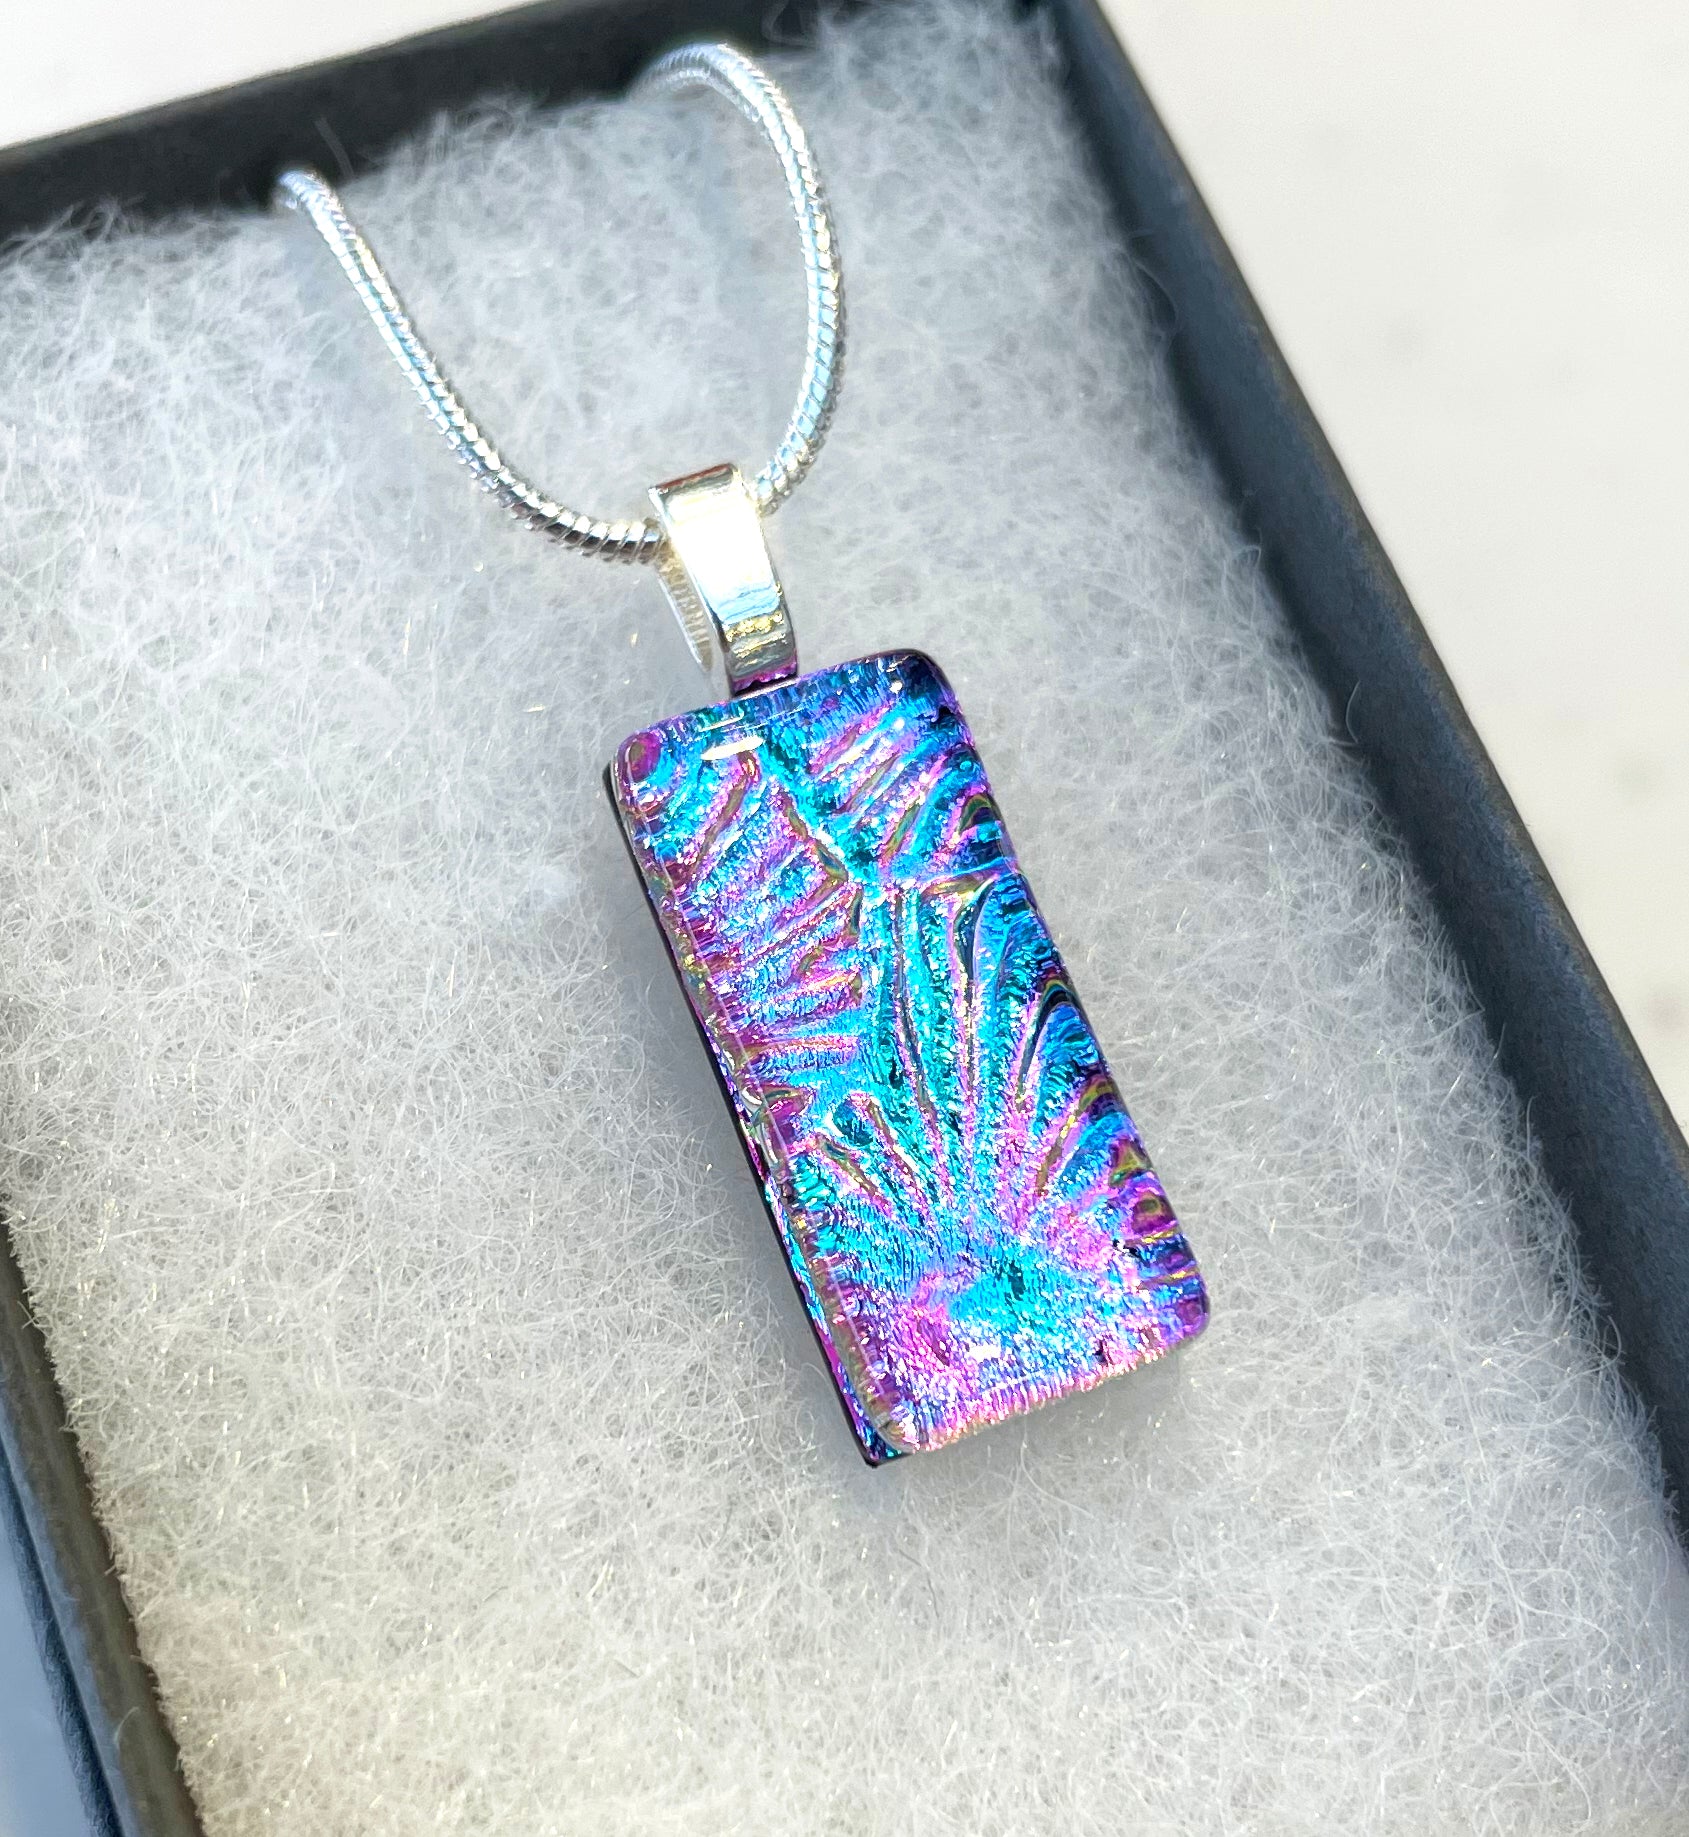 Jade Tapson - Pink, Purple & Blue Patterned Dichroic Necklace